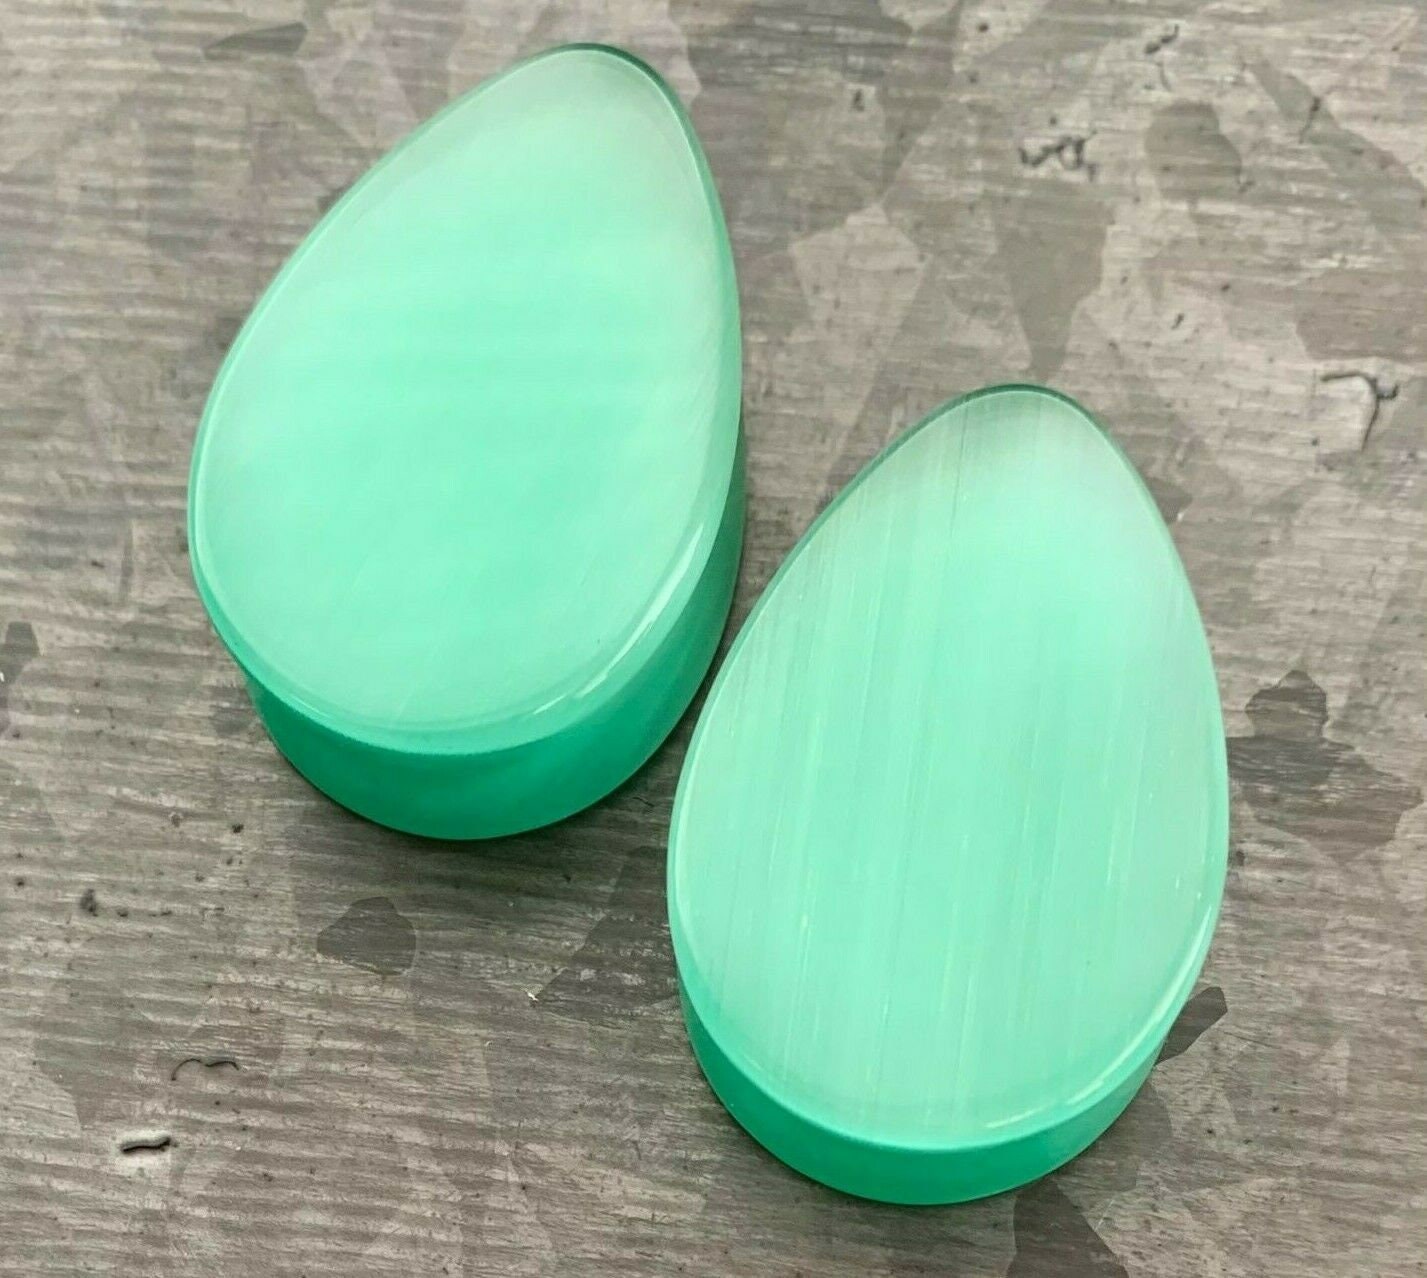 PAIR of Unique Sea Foam Green Cat Eye Stone Double Flare Teardrop Plugs - Gauges 2g (6mm) up to 1" (25mm) available!